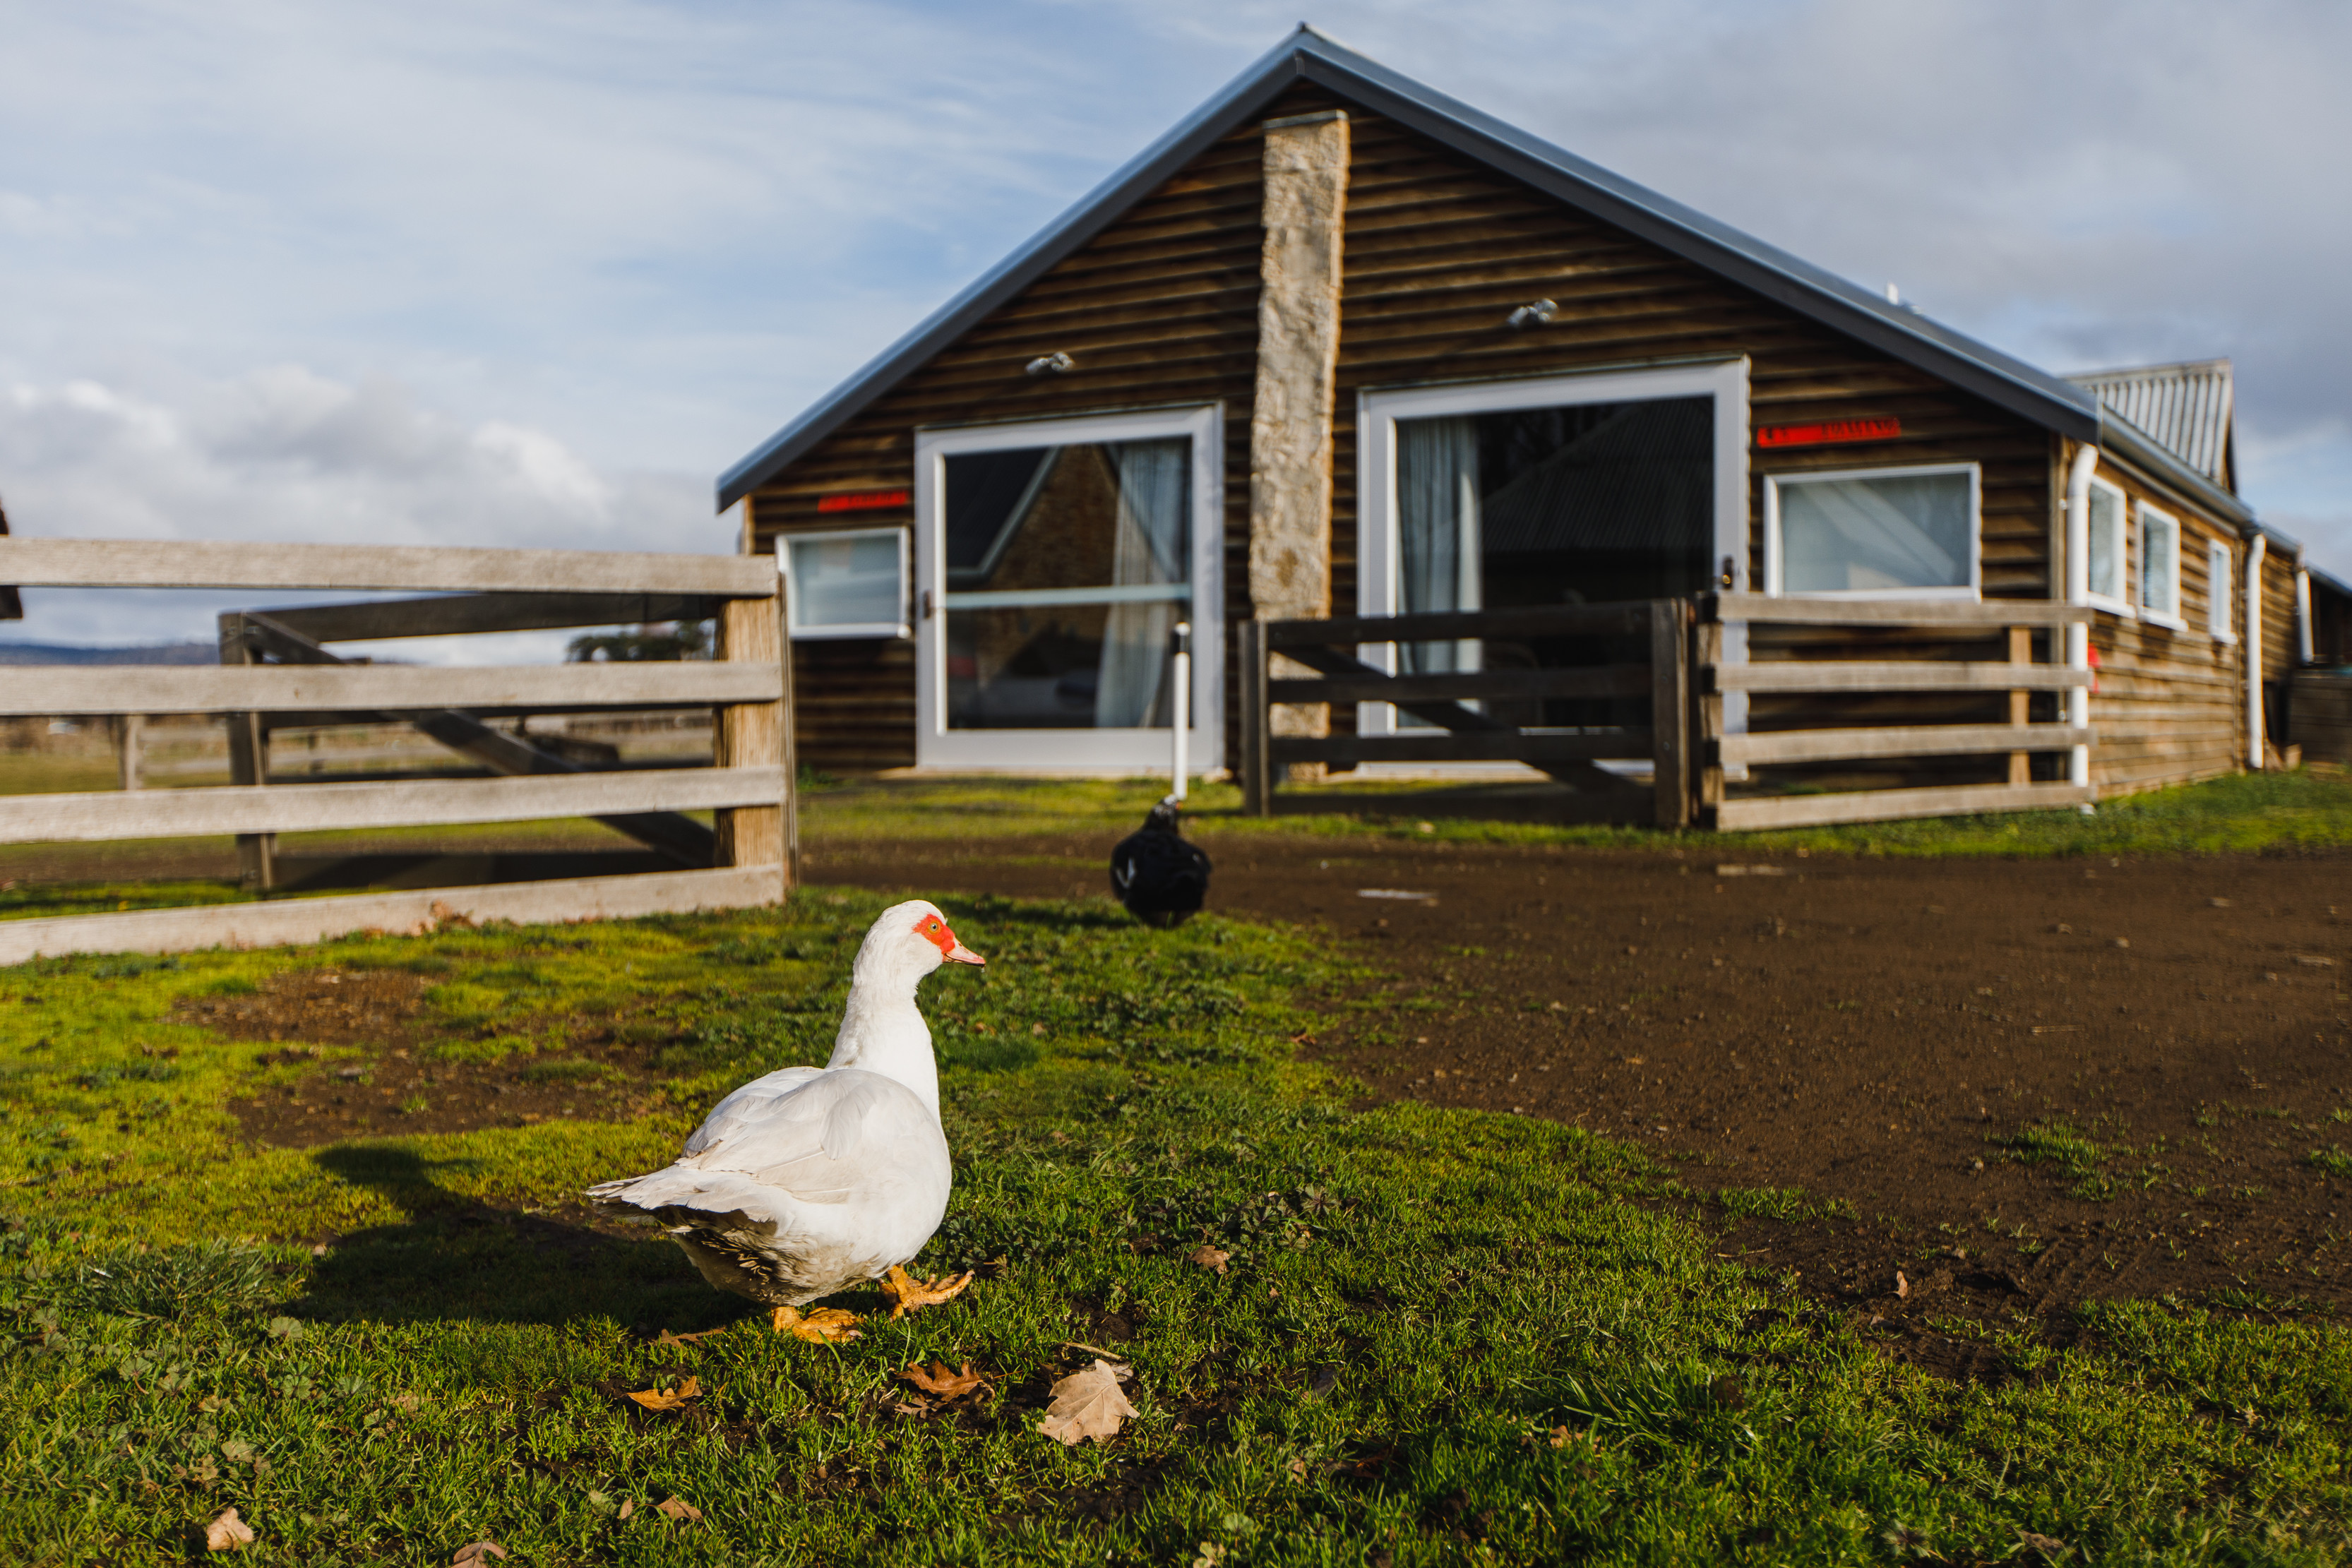 A duck standing in front of the Ratho Farm. Farm house in the background.